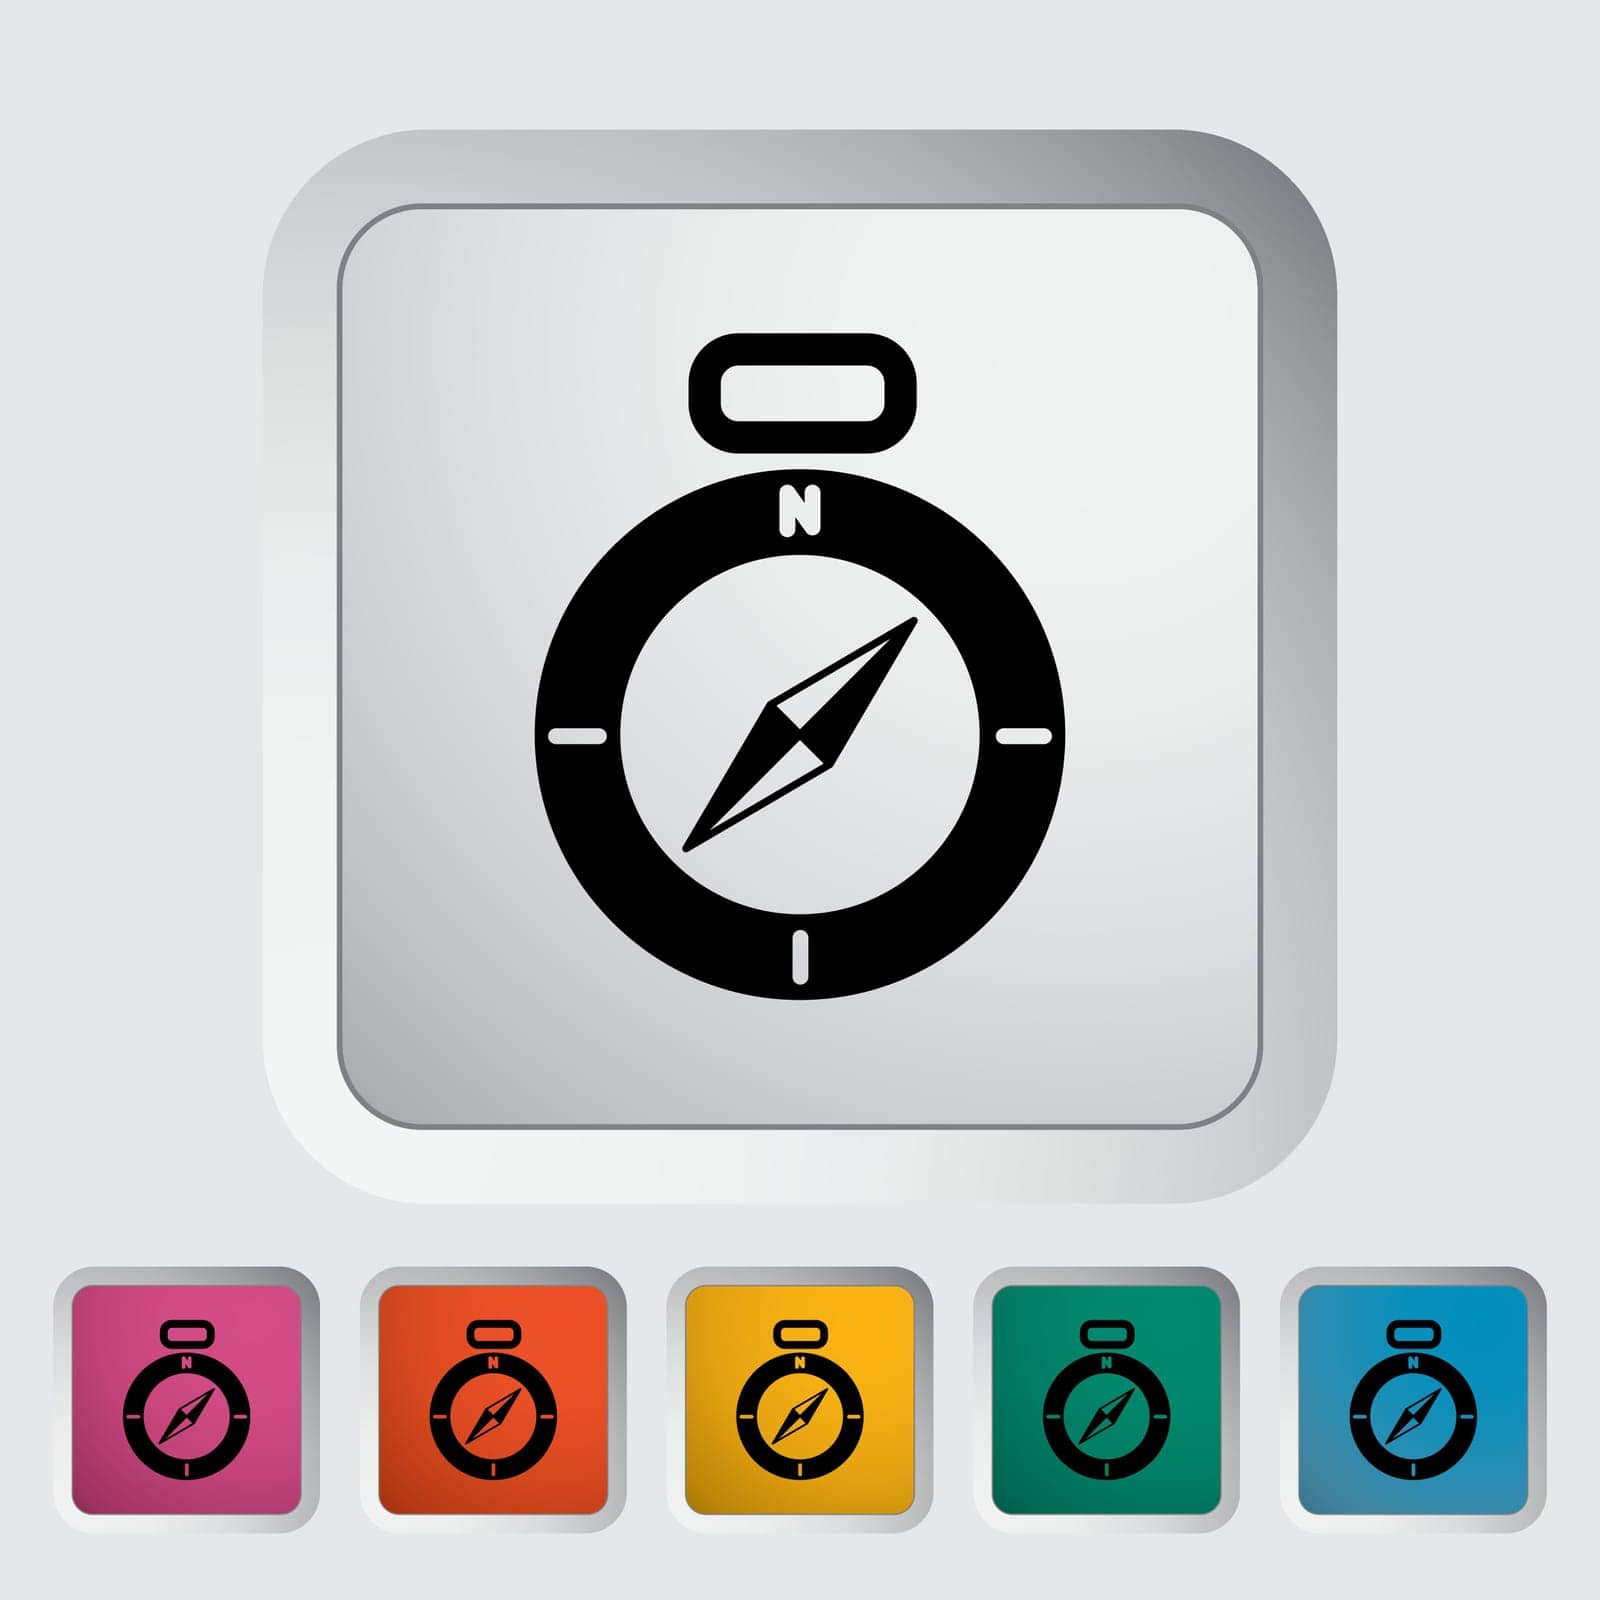 Compass. Single flat icon on the button. Vector illustration.